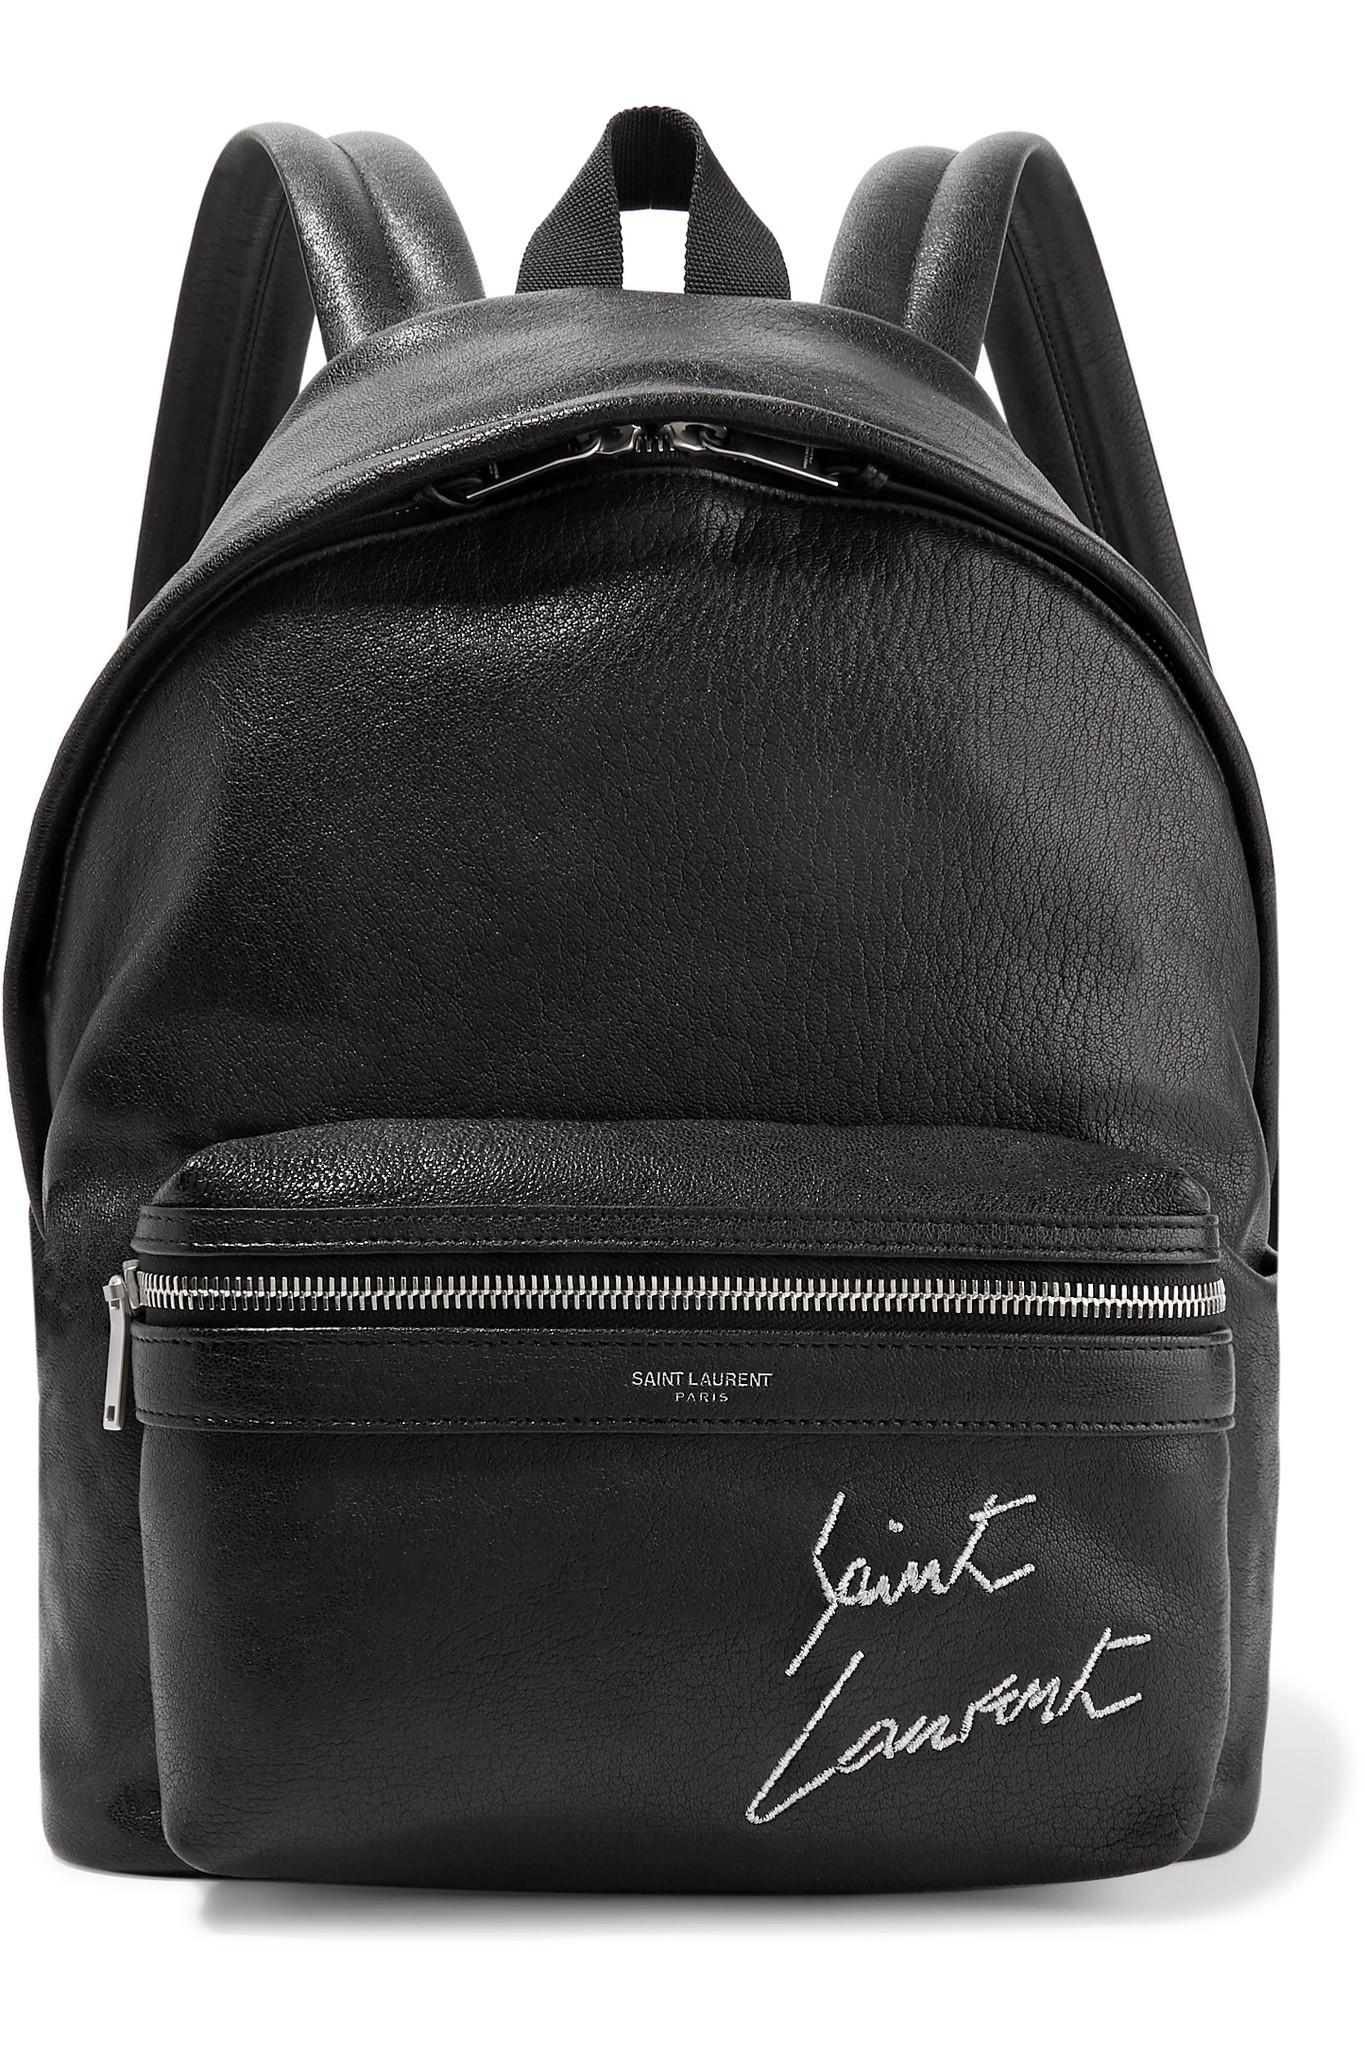 Lyst - Saint laurent Mini Toy City Embroidered Textured-leather ...